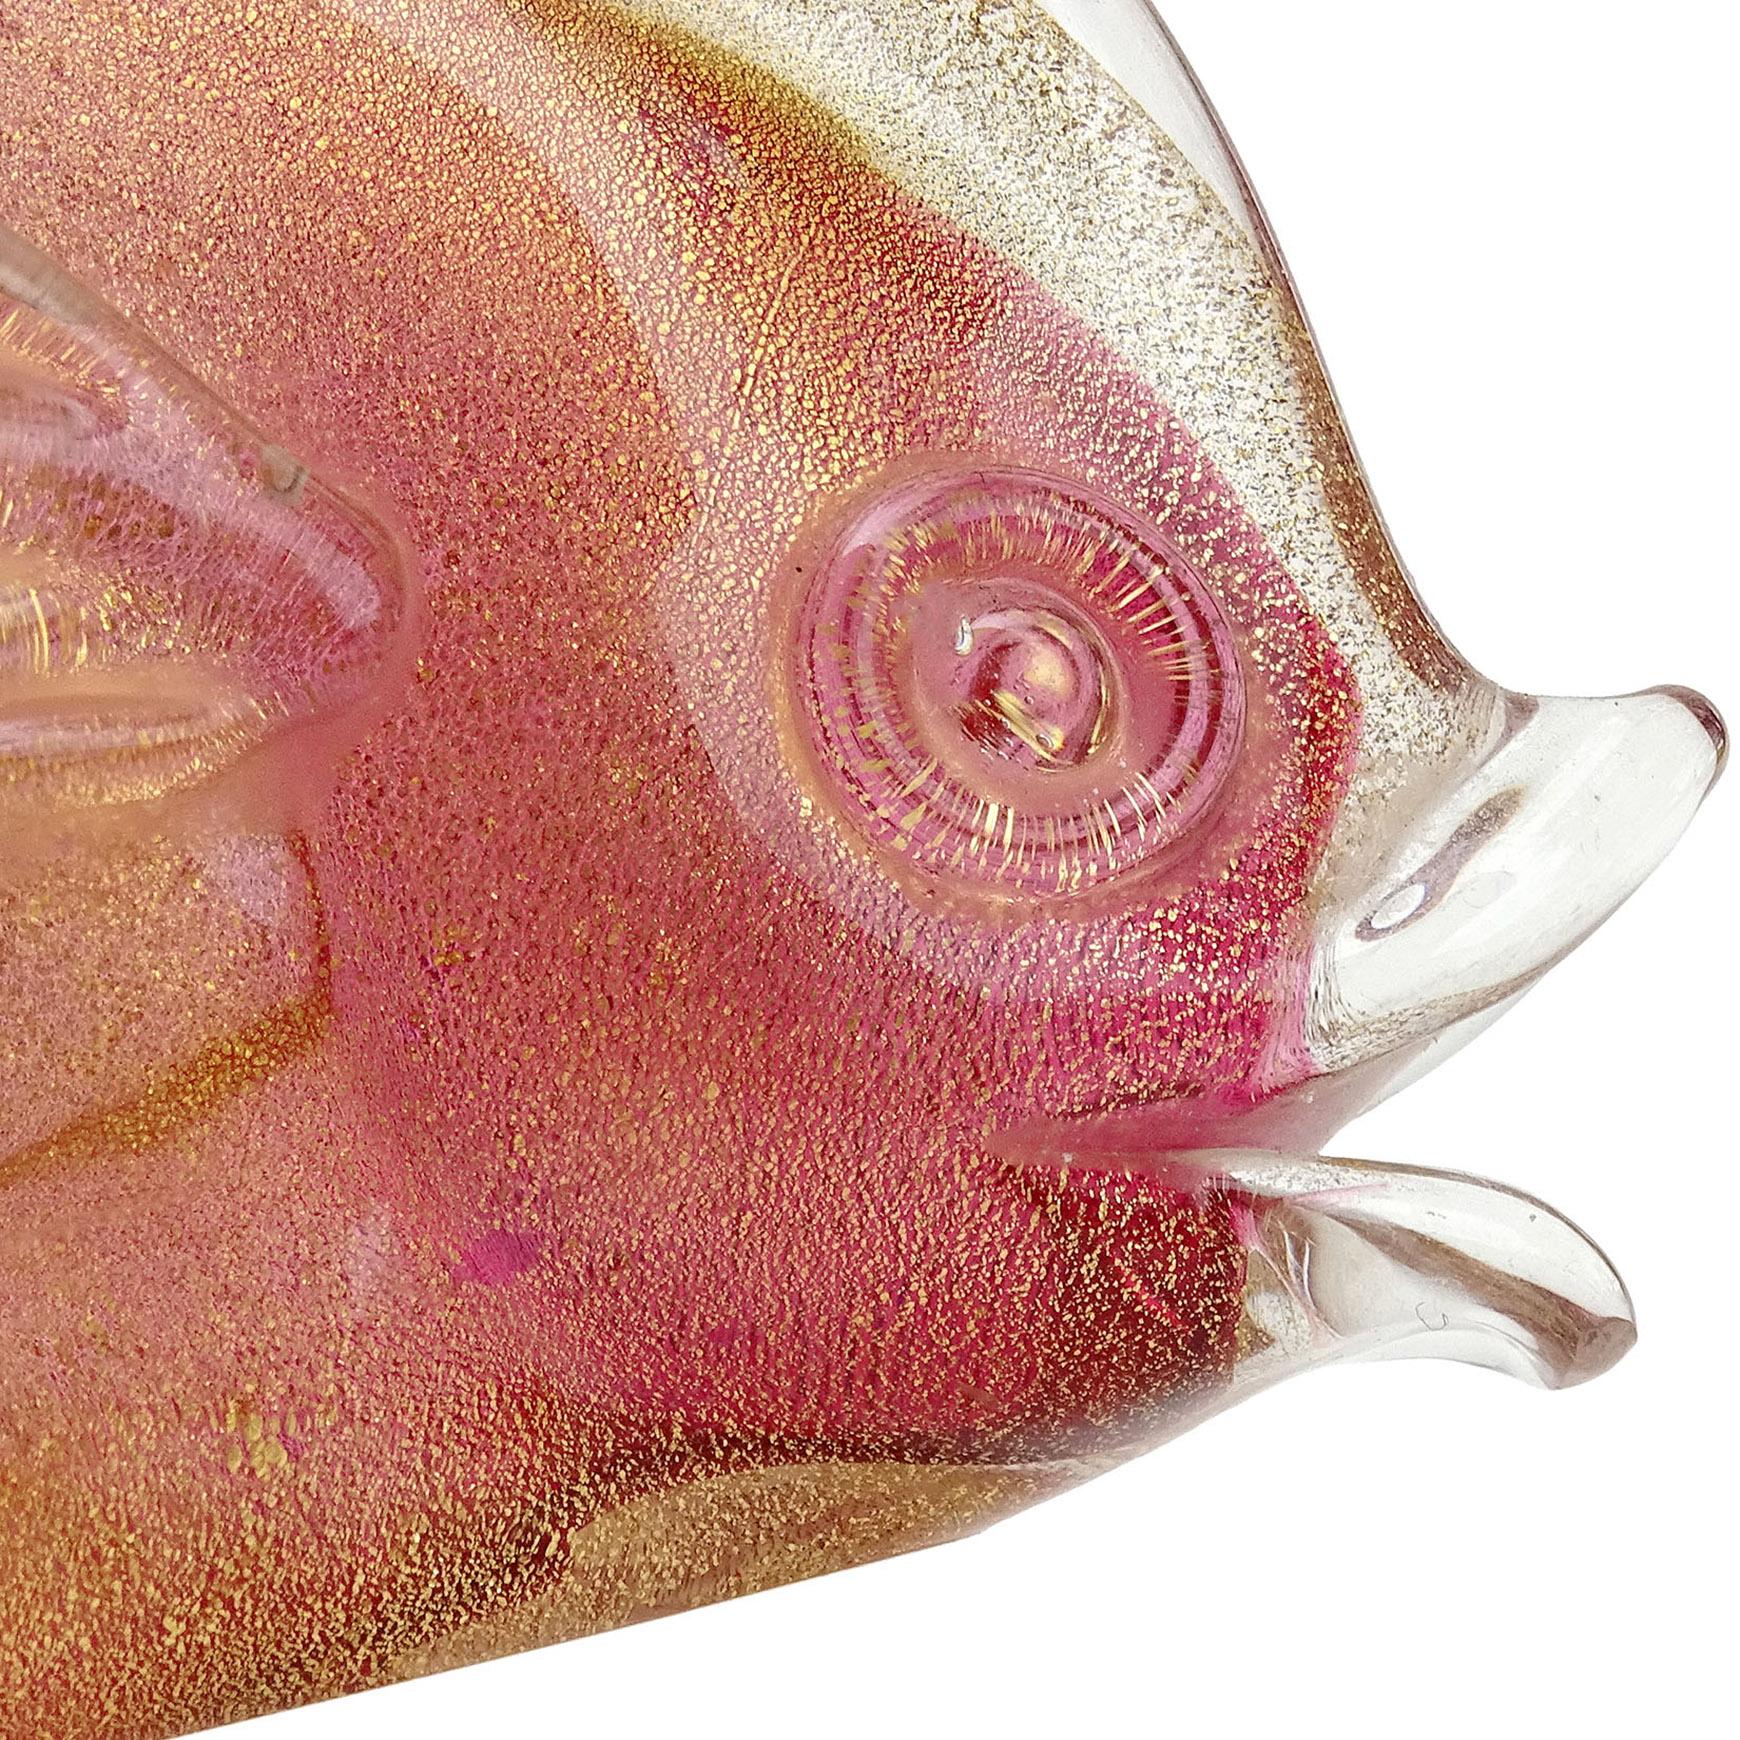 Beautiful vintage Murano hand blown Sommerso pink and gold flecks Italian art glass fish sculpture / figurine. Documented to designer Archimede Seguso. The piece is profusely covered in gold leaf. Nicely detailed. Would make a great display piece on